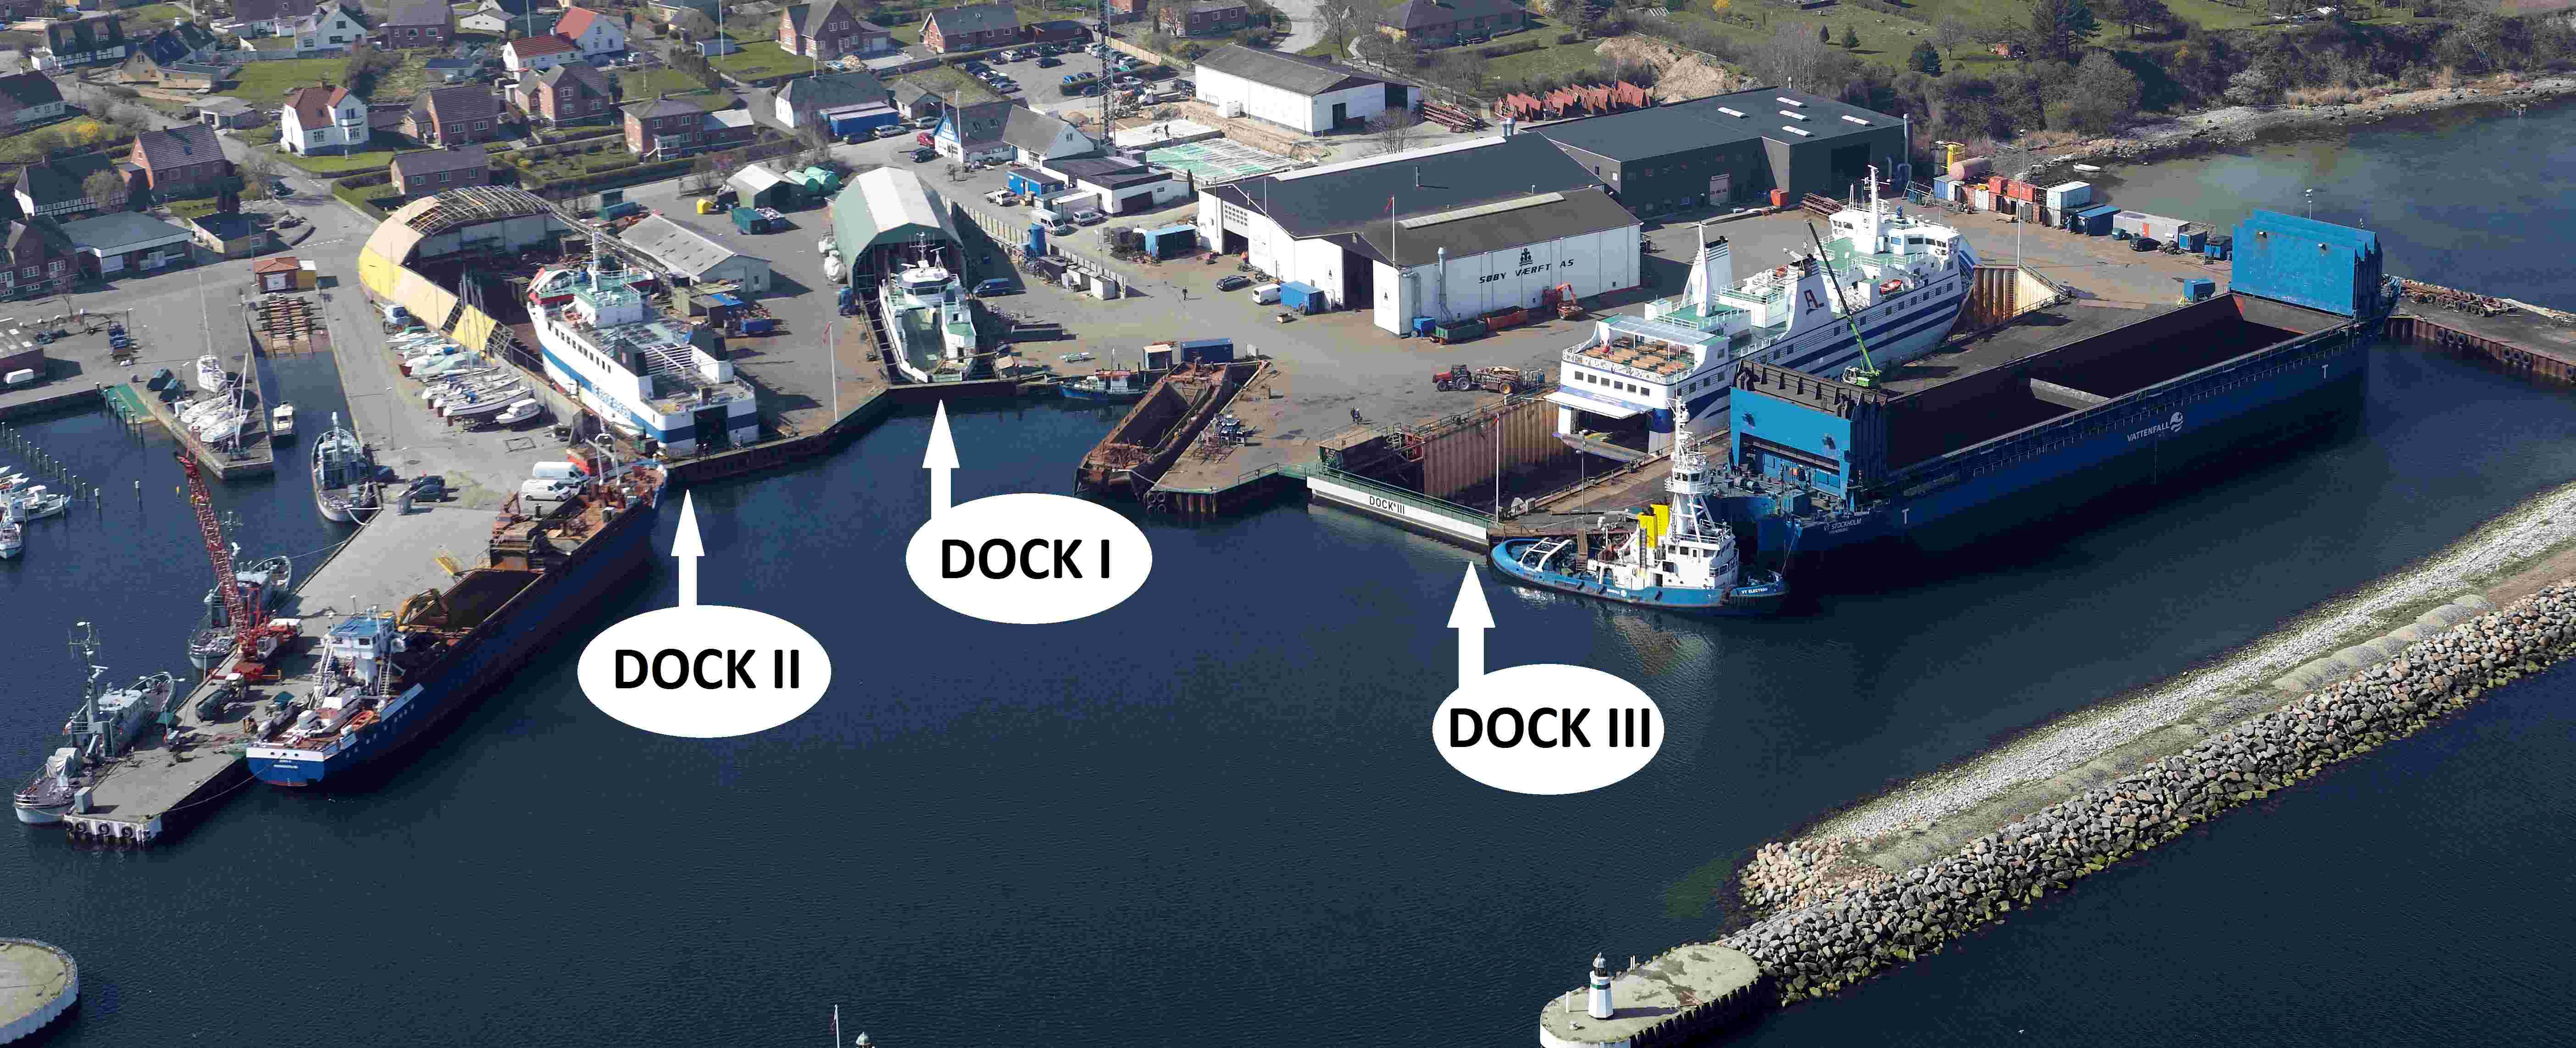 Søby Shipyard seen from above with dock indication